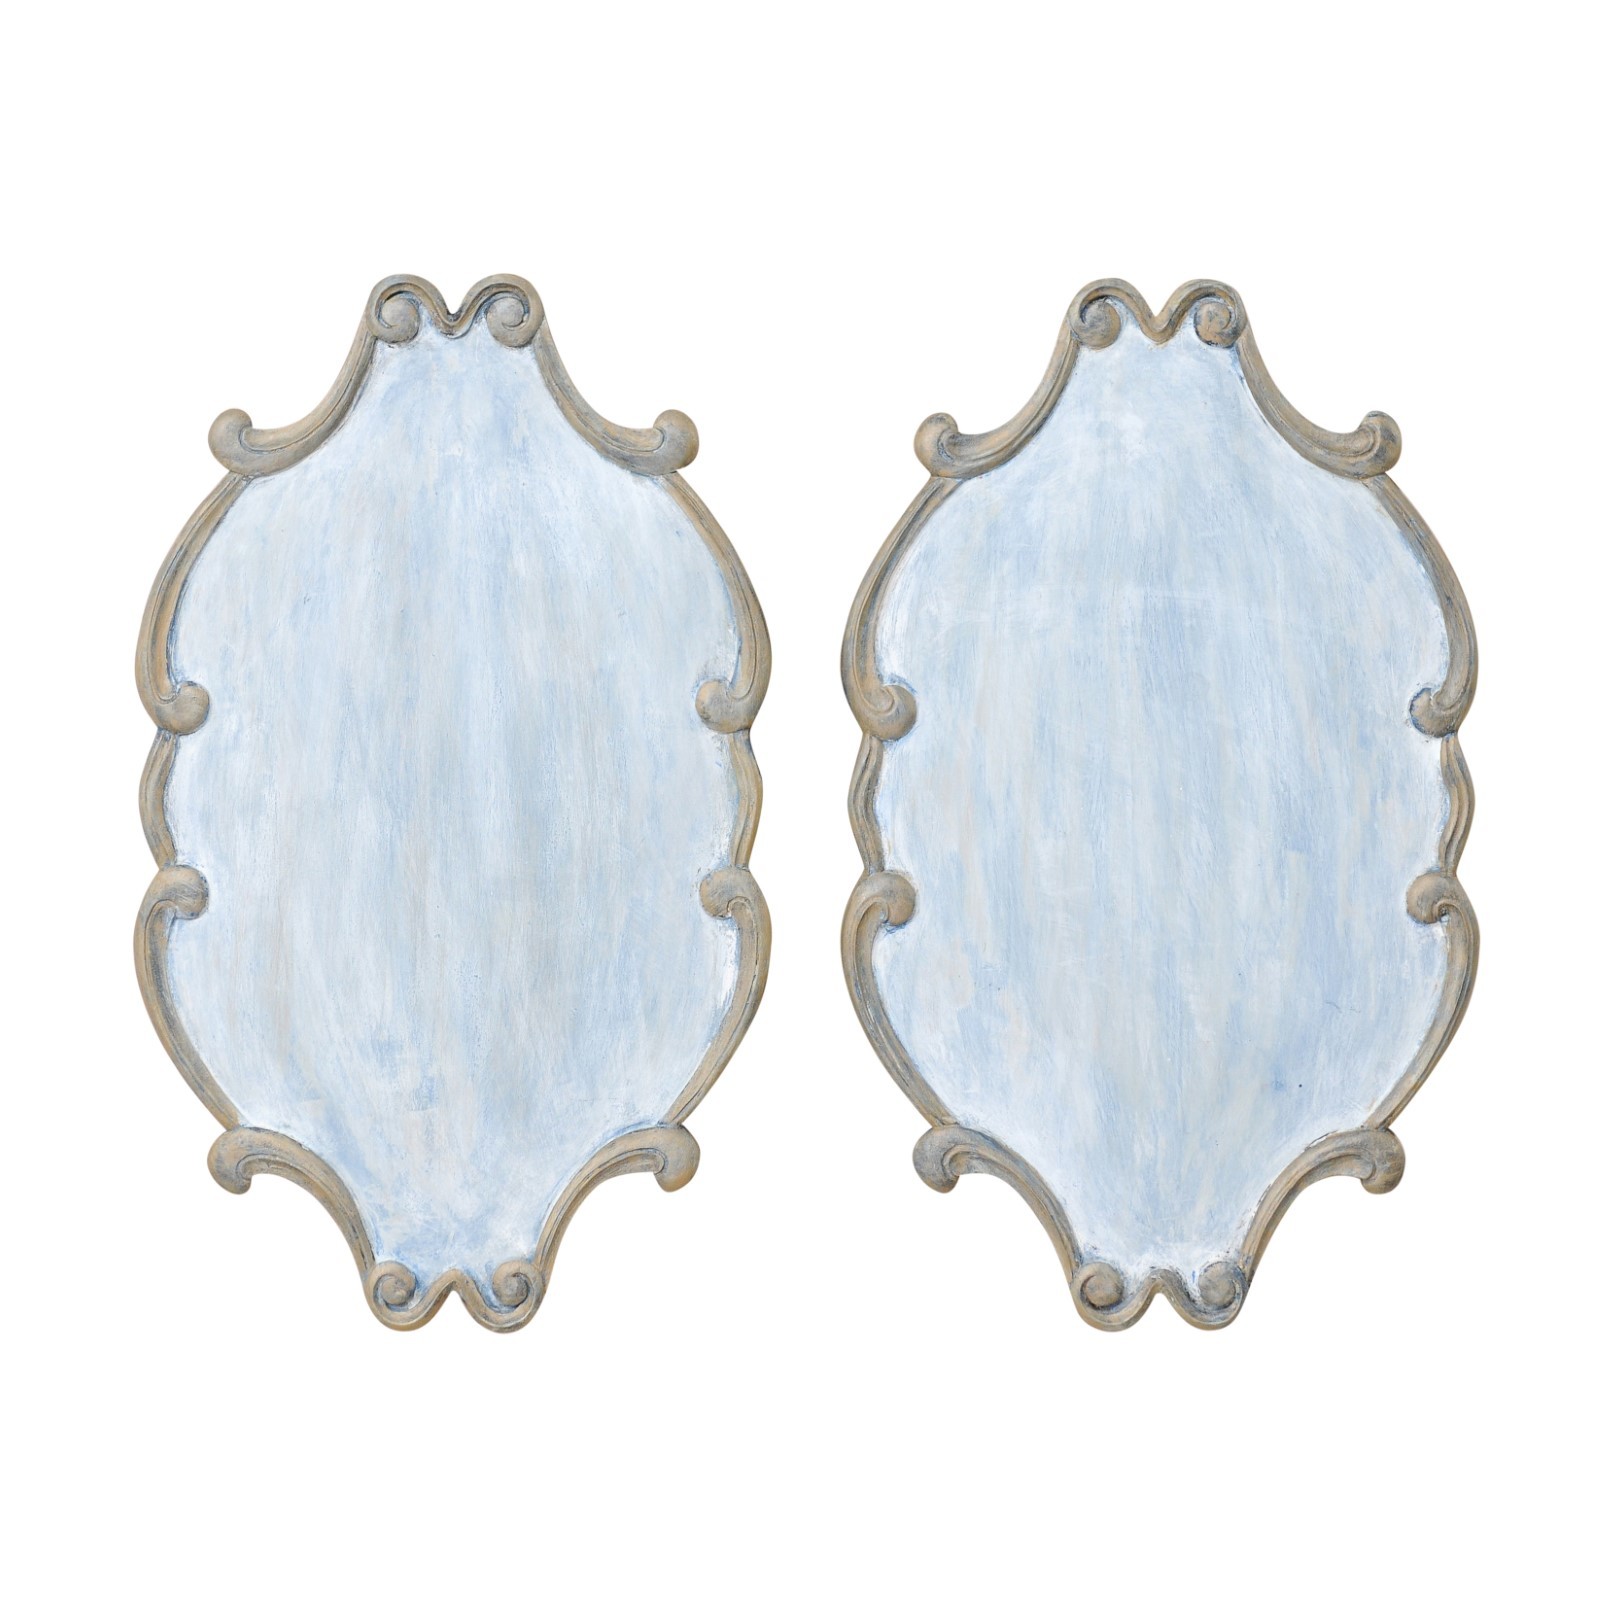 Pair 35"H Carved Wood Plaques, Blue & Gray